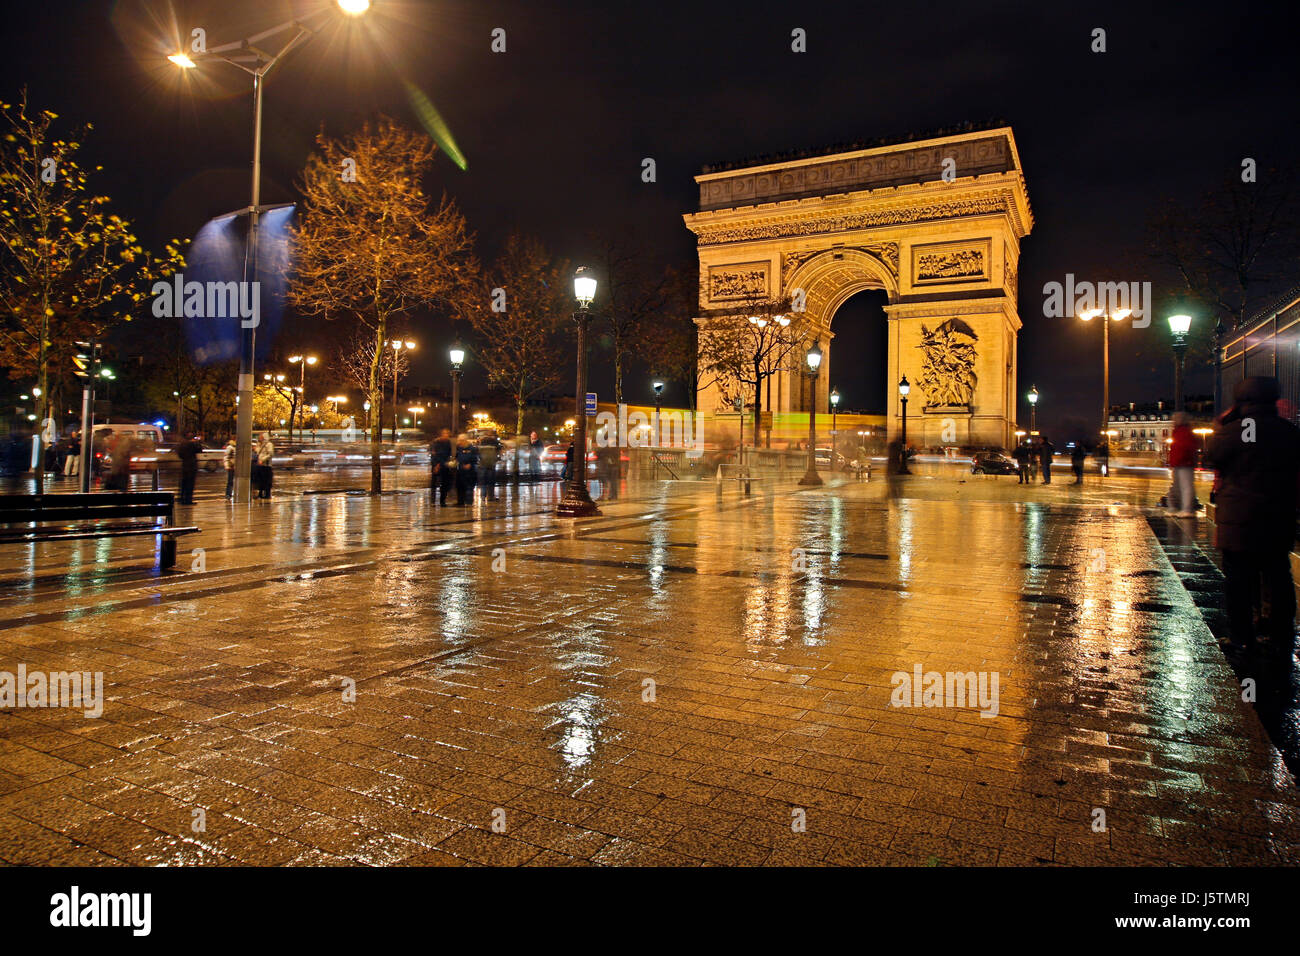 at night night nighttime night photograph lights paris france in the evening Stock Photo